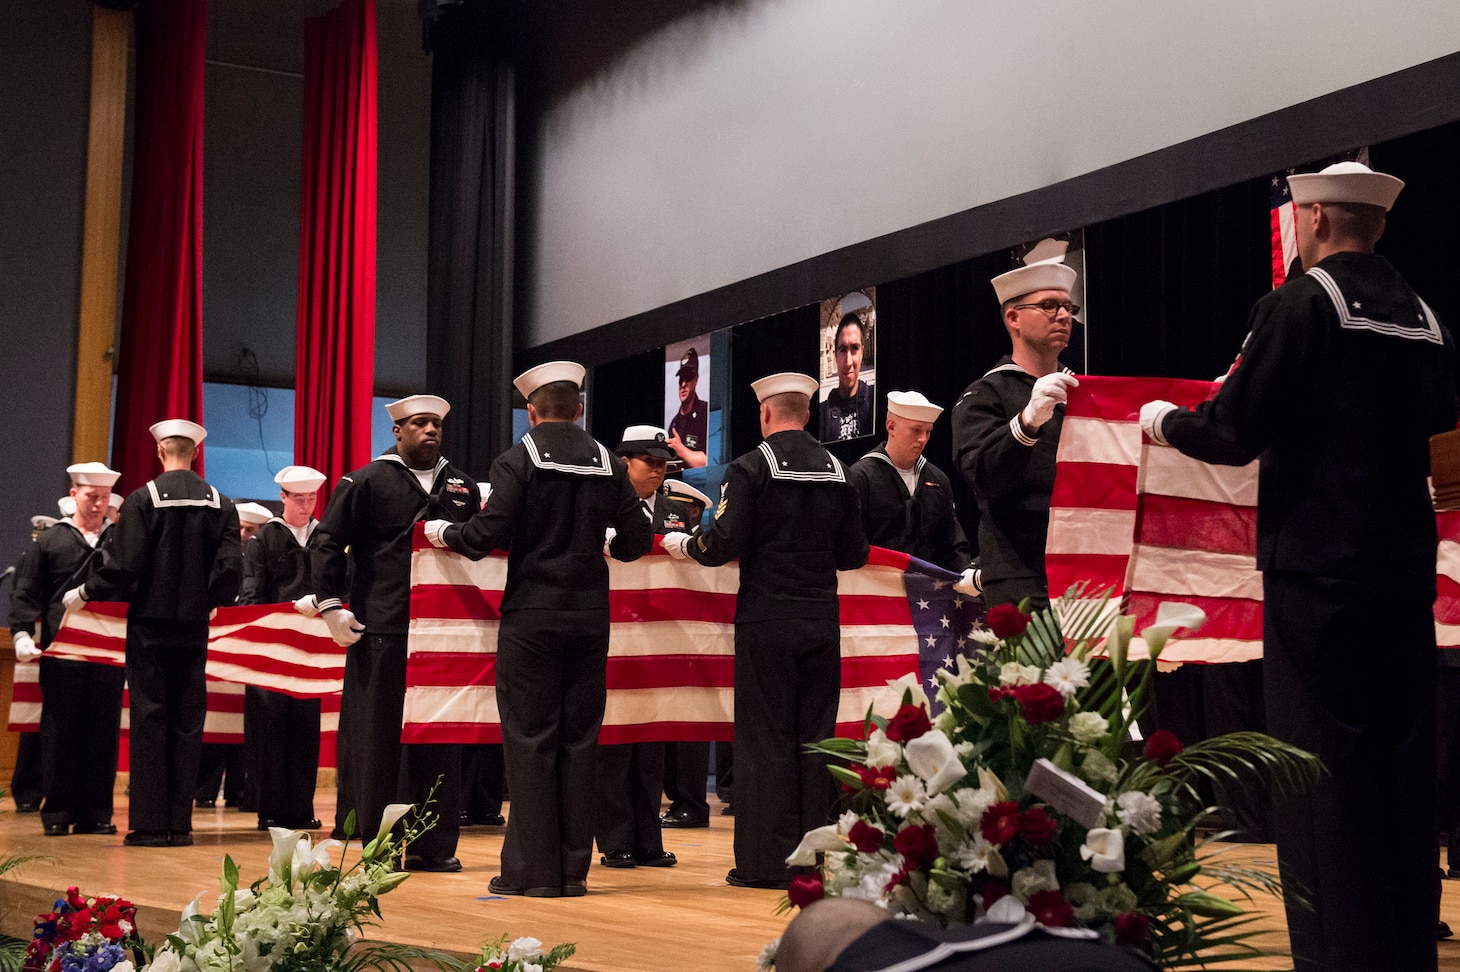 YOKOSUKA, Japan (June 27, 2017) Sailors ceremonially fold seven American flags during a memorial ceremony at Fleet Activities (FLEACT) Yokosuka for seven Sailors assigned to Arleigh Burke-class guided-missile destroyer USS Fitzgerald (DDG 62) who were killed in a collision at sea, June 17. (U.S. Navy photo by Mass Communication Specialist 2nd Class Raymond D. Diaz III/Released)
